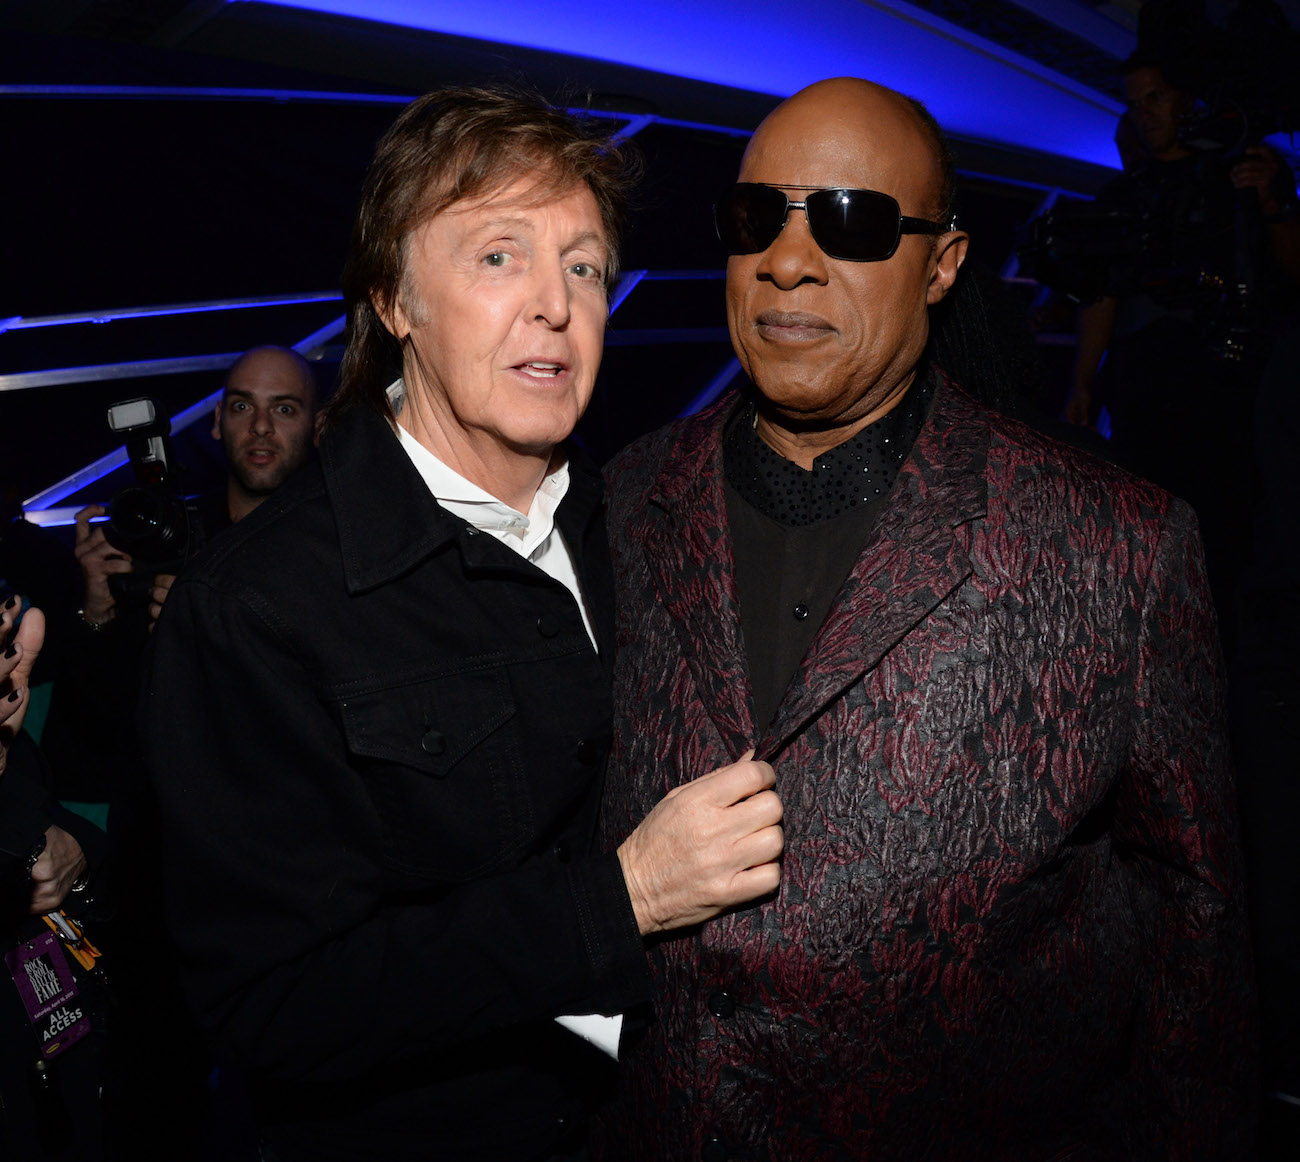 Paul McCartney and Stevie Wonder at the 2015 Rock & Roll Hall of Fame induction ceremony.